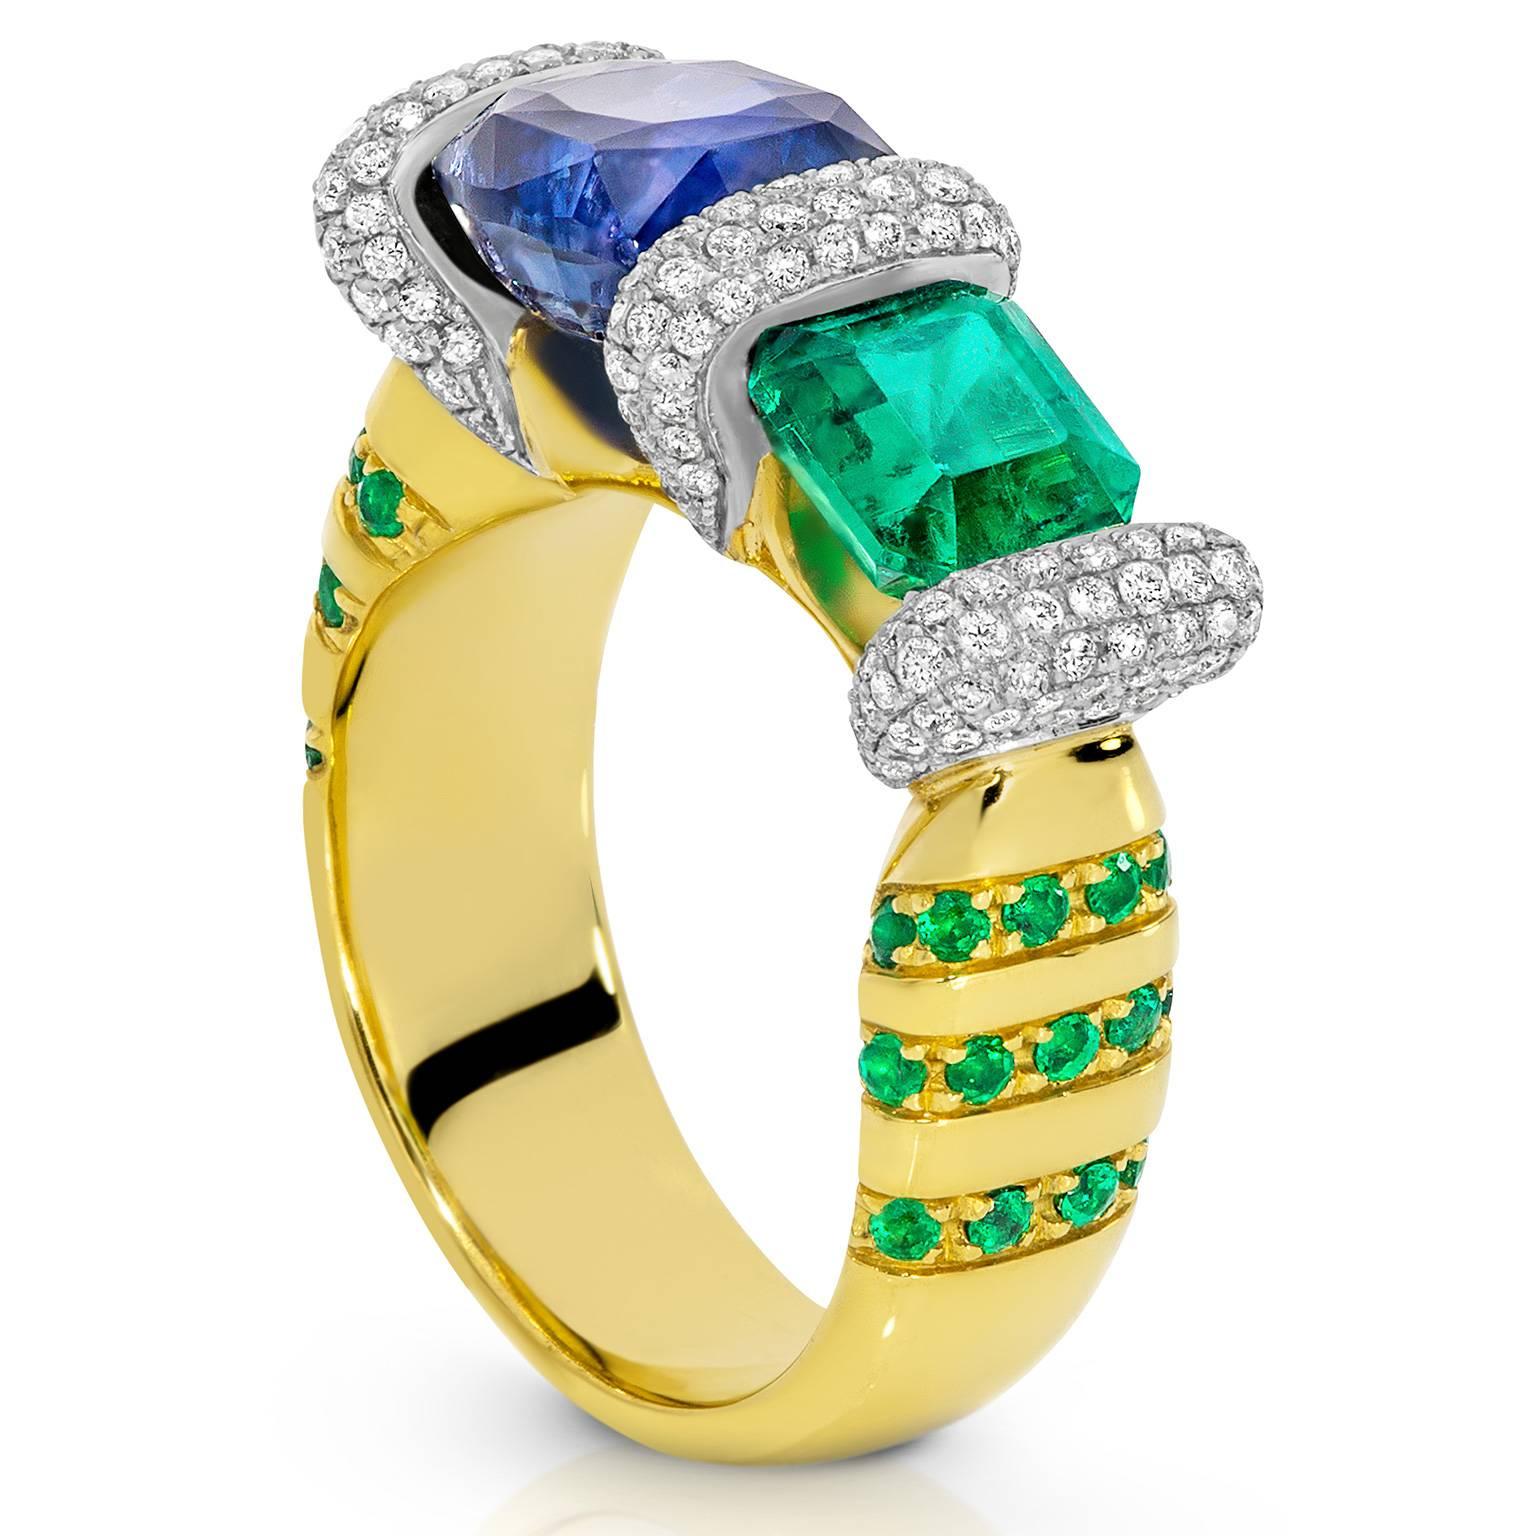 This spectacular ring by Lizunova is handmade in Sydney in 18 karat yellow gold and 18 karat white gold, and is set with a 4ct cushion cut Ceylon sapphire and a 1.5ct Colombian emerald. Intricate diamond pave consisting of over 100 diamonds offsets